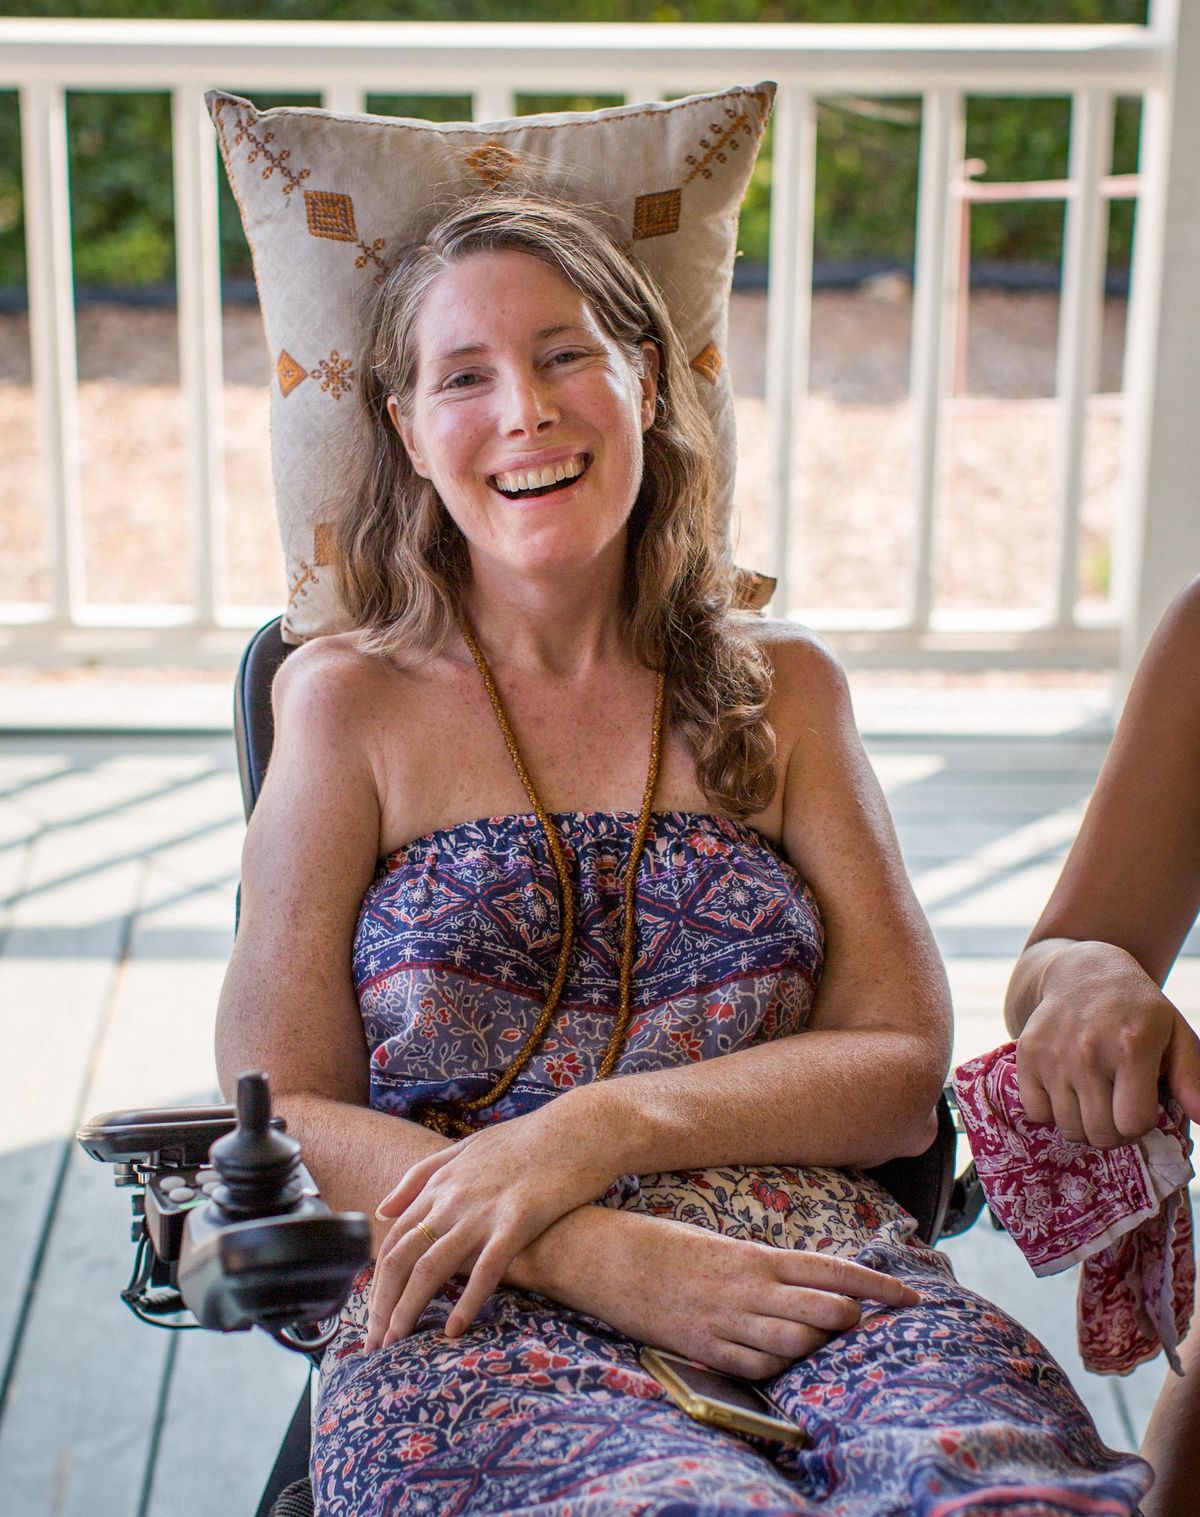 Betsy Davis smiles July 24, 2016, during a two-day going away party with her family and friends in Ojai, Calif. In early July, Davis emailed her closest friends and family to invite them to a two-day celebration, telling them: “These circumstances are unlike any party you have attended before, requiring emotional stamina, centeredness, and openness. And one rule: No crying.” Davis, diagnosed with ALS, held the party to say goodbye before becoming one of the first California residents to take life-ending drugs under a new law that gave such an option to the terminally ill. (Niels Alpert / Associated Press)